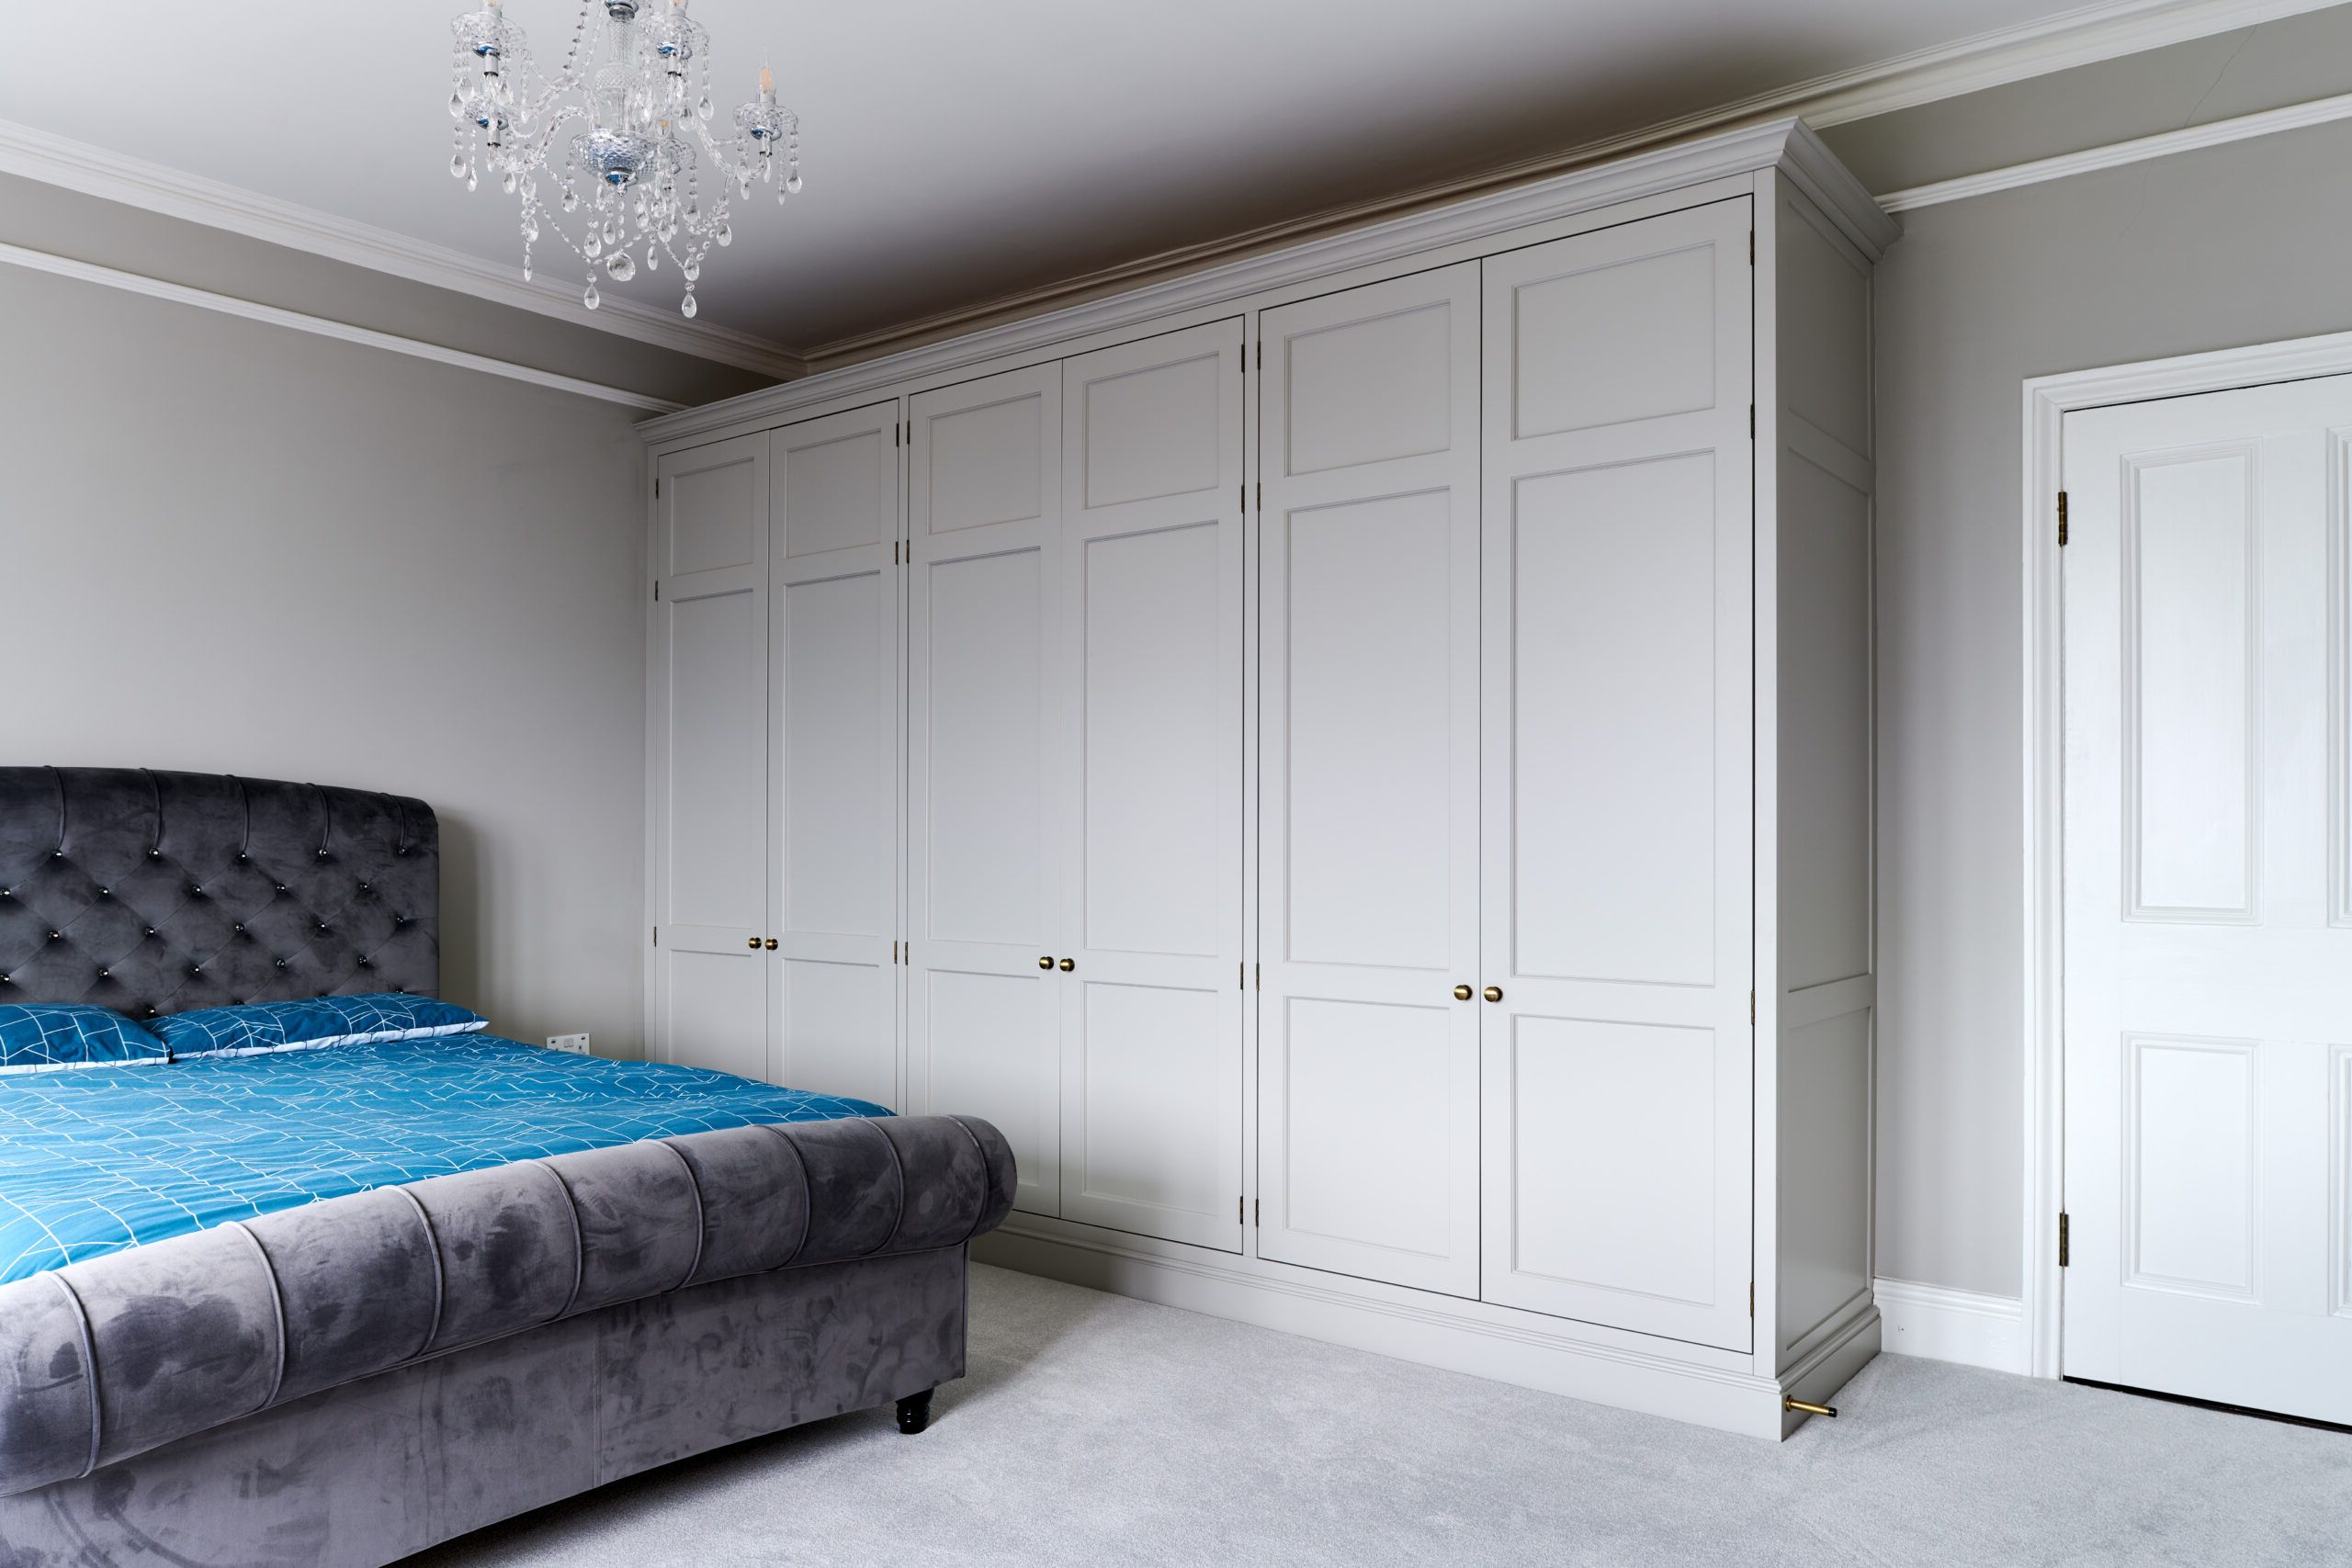 Fitted Or Freestanding Bespoke Wardrobes | Bath Bespoke Pertaining To French Style Fitted Wardrobes (Gallery 13 of 20)